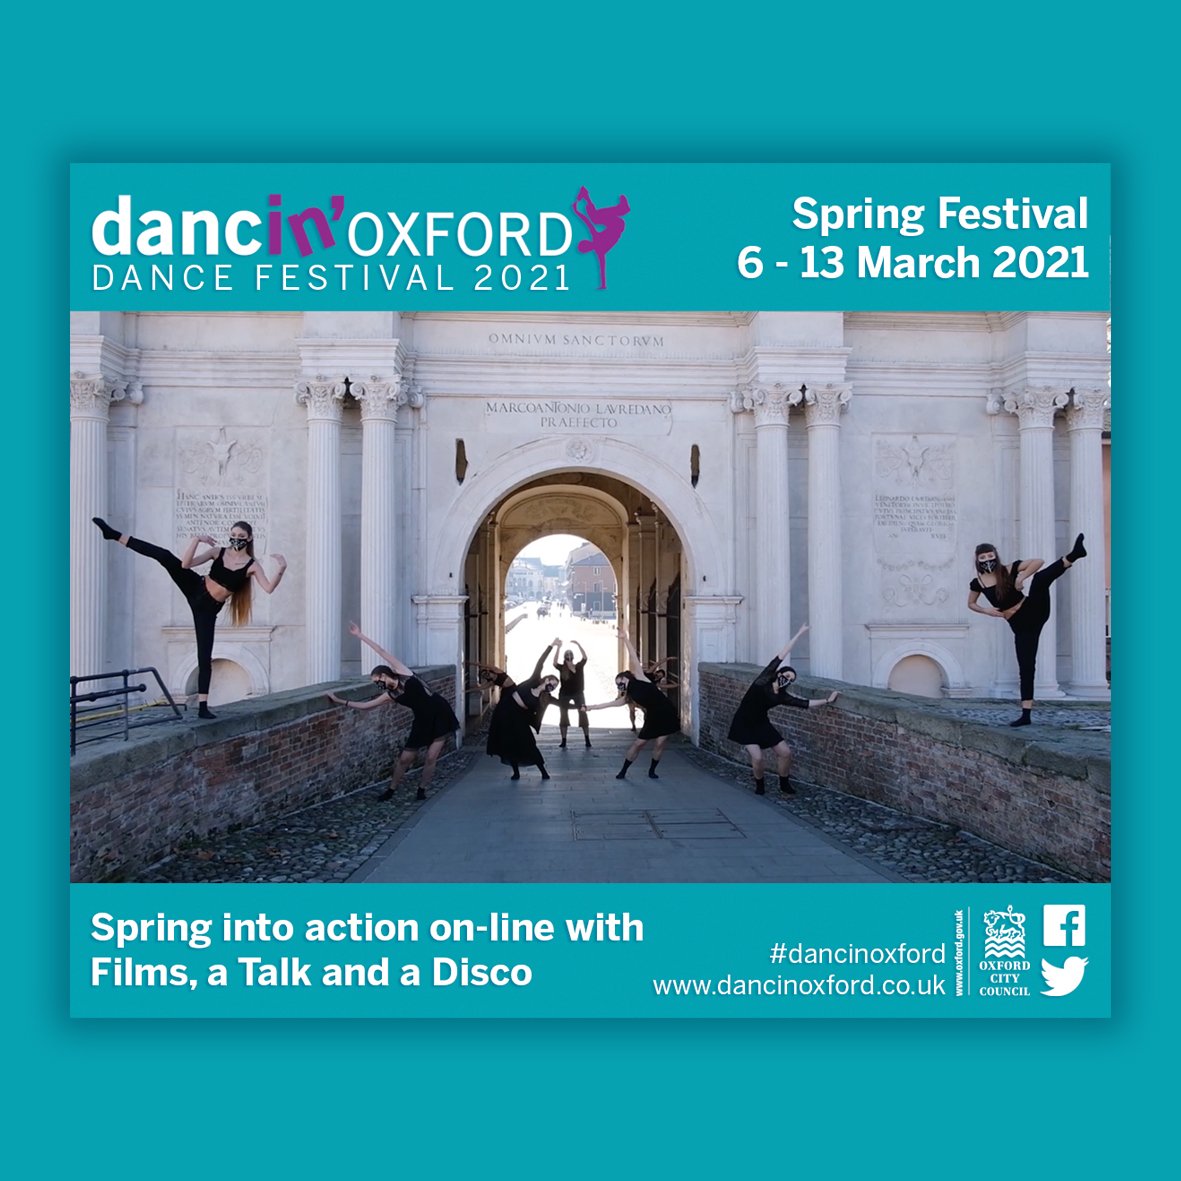 Dancin Oxford | Eye-catching Posters and Merchandise Designed by Hot Rock Group